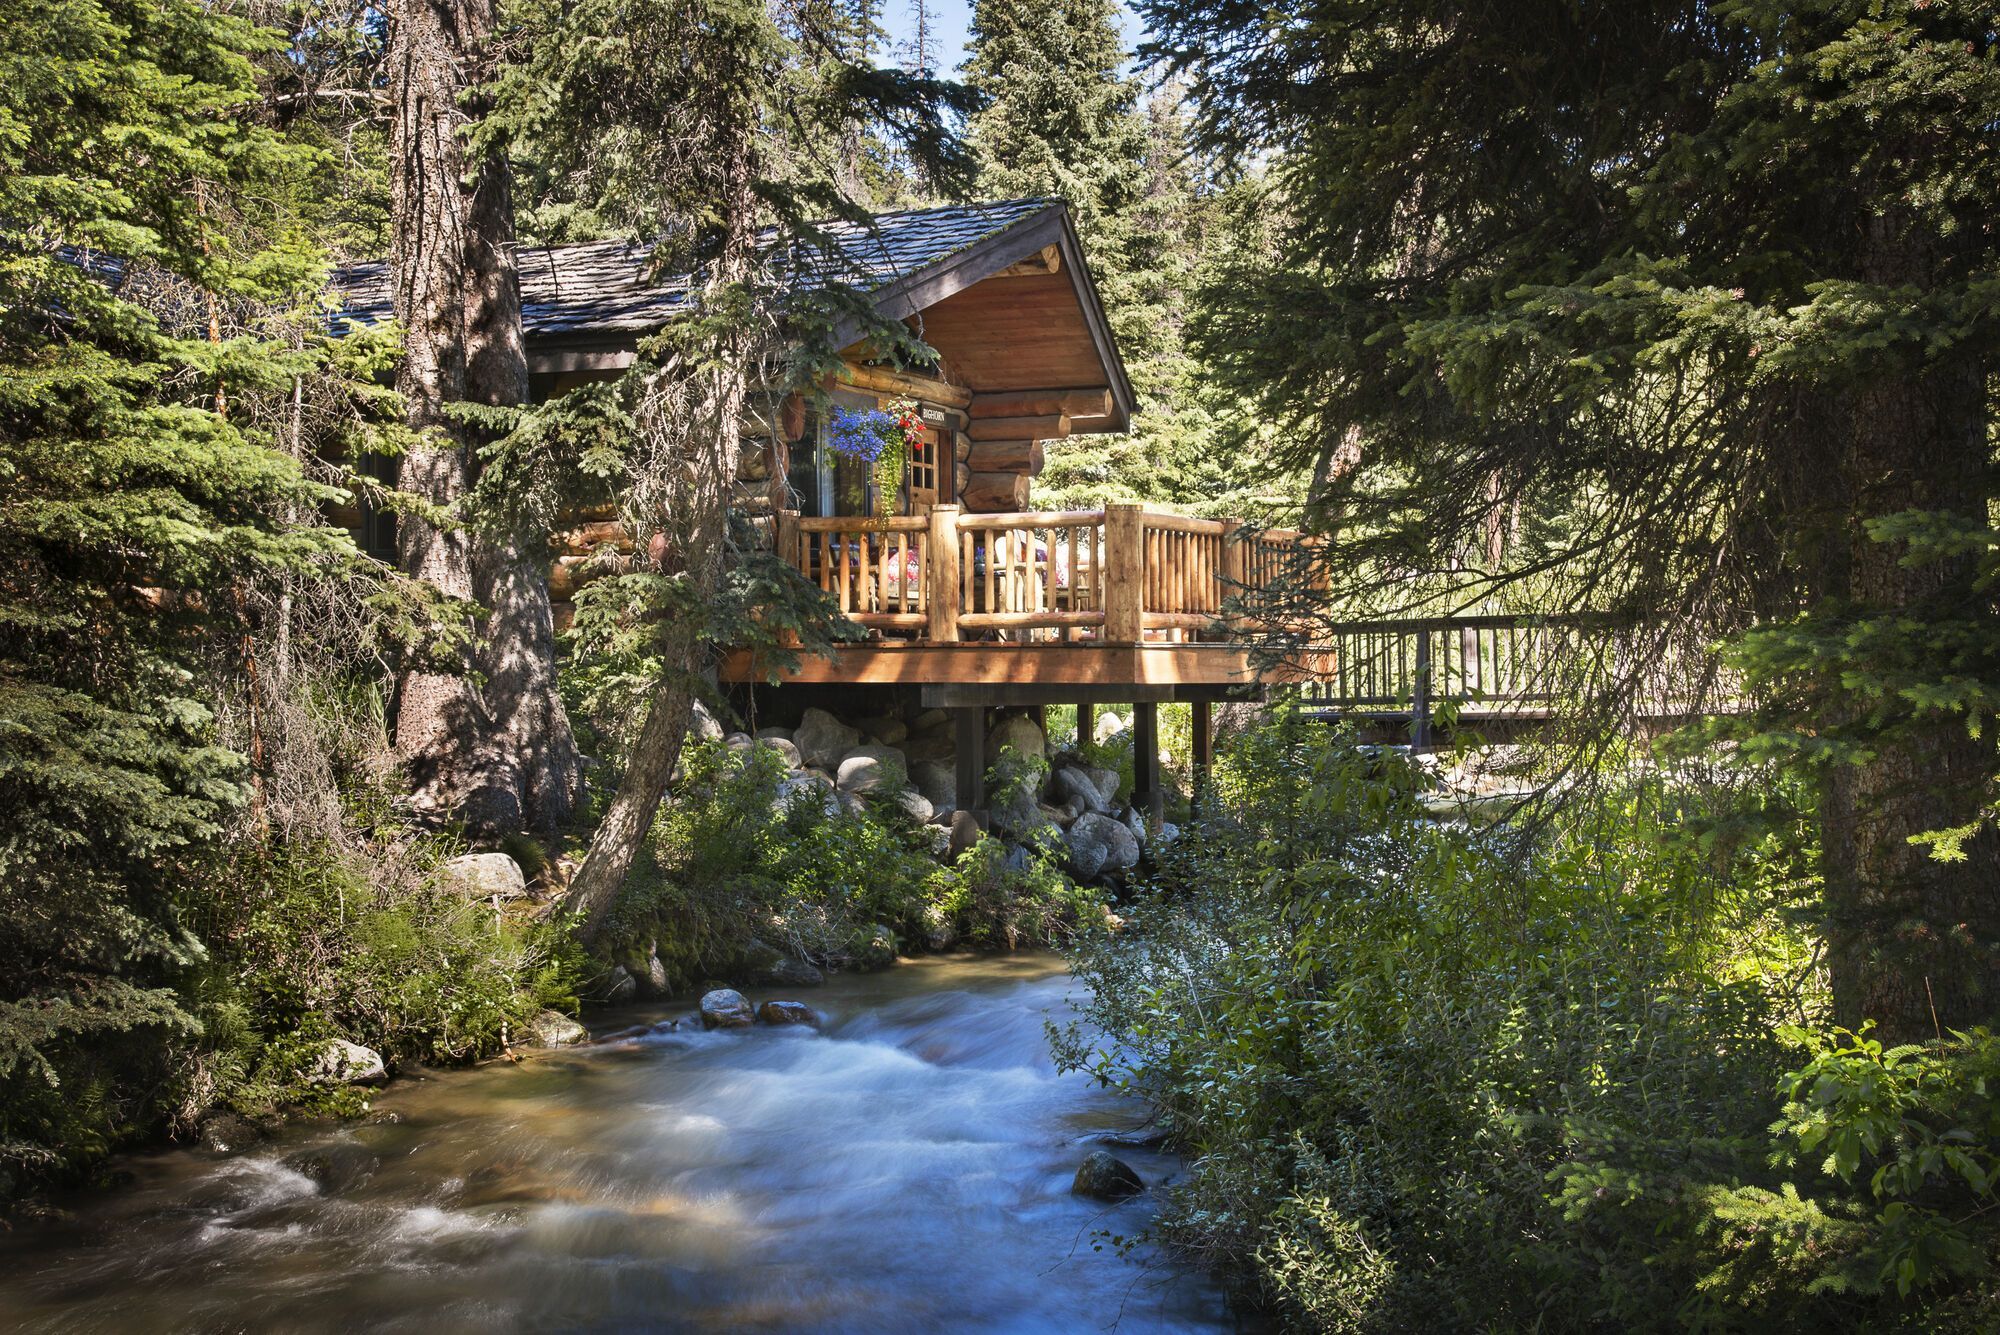 Top 5 Montana resorts that combine luxury vacations and wilderness adventure